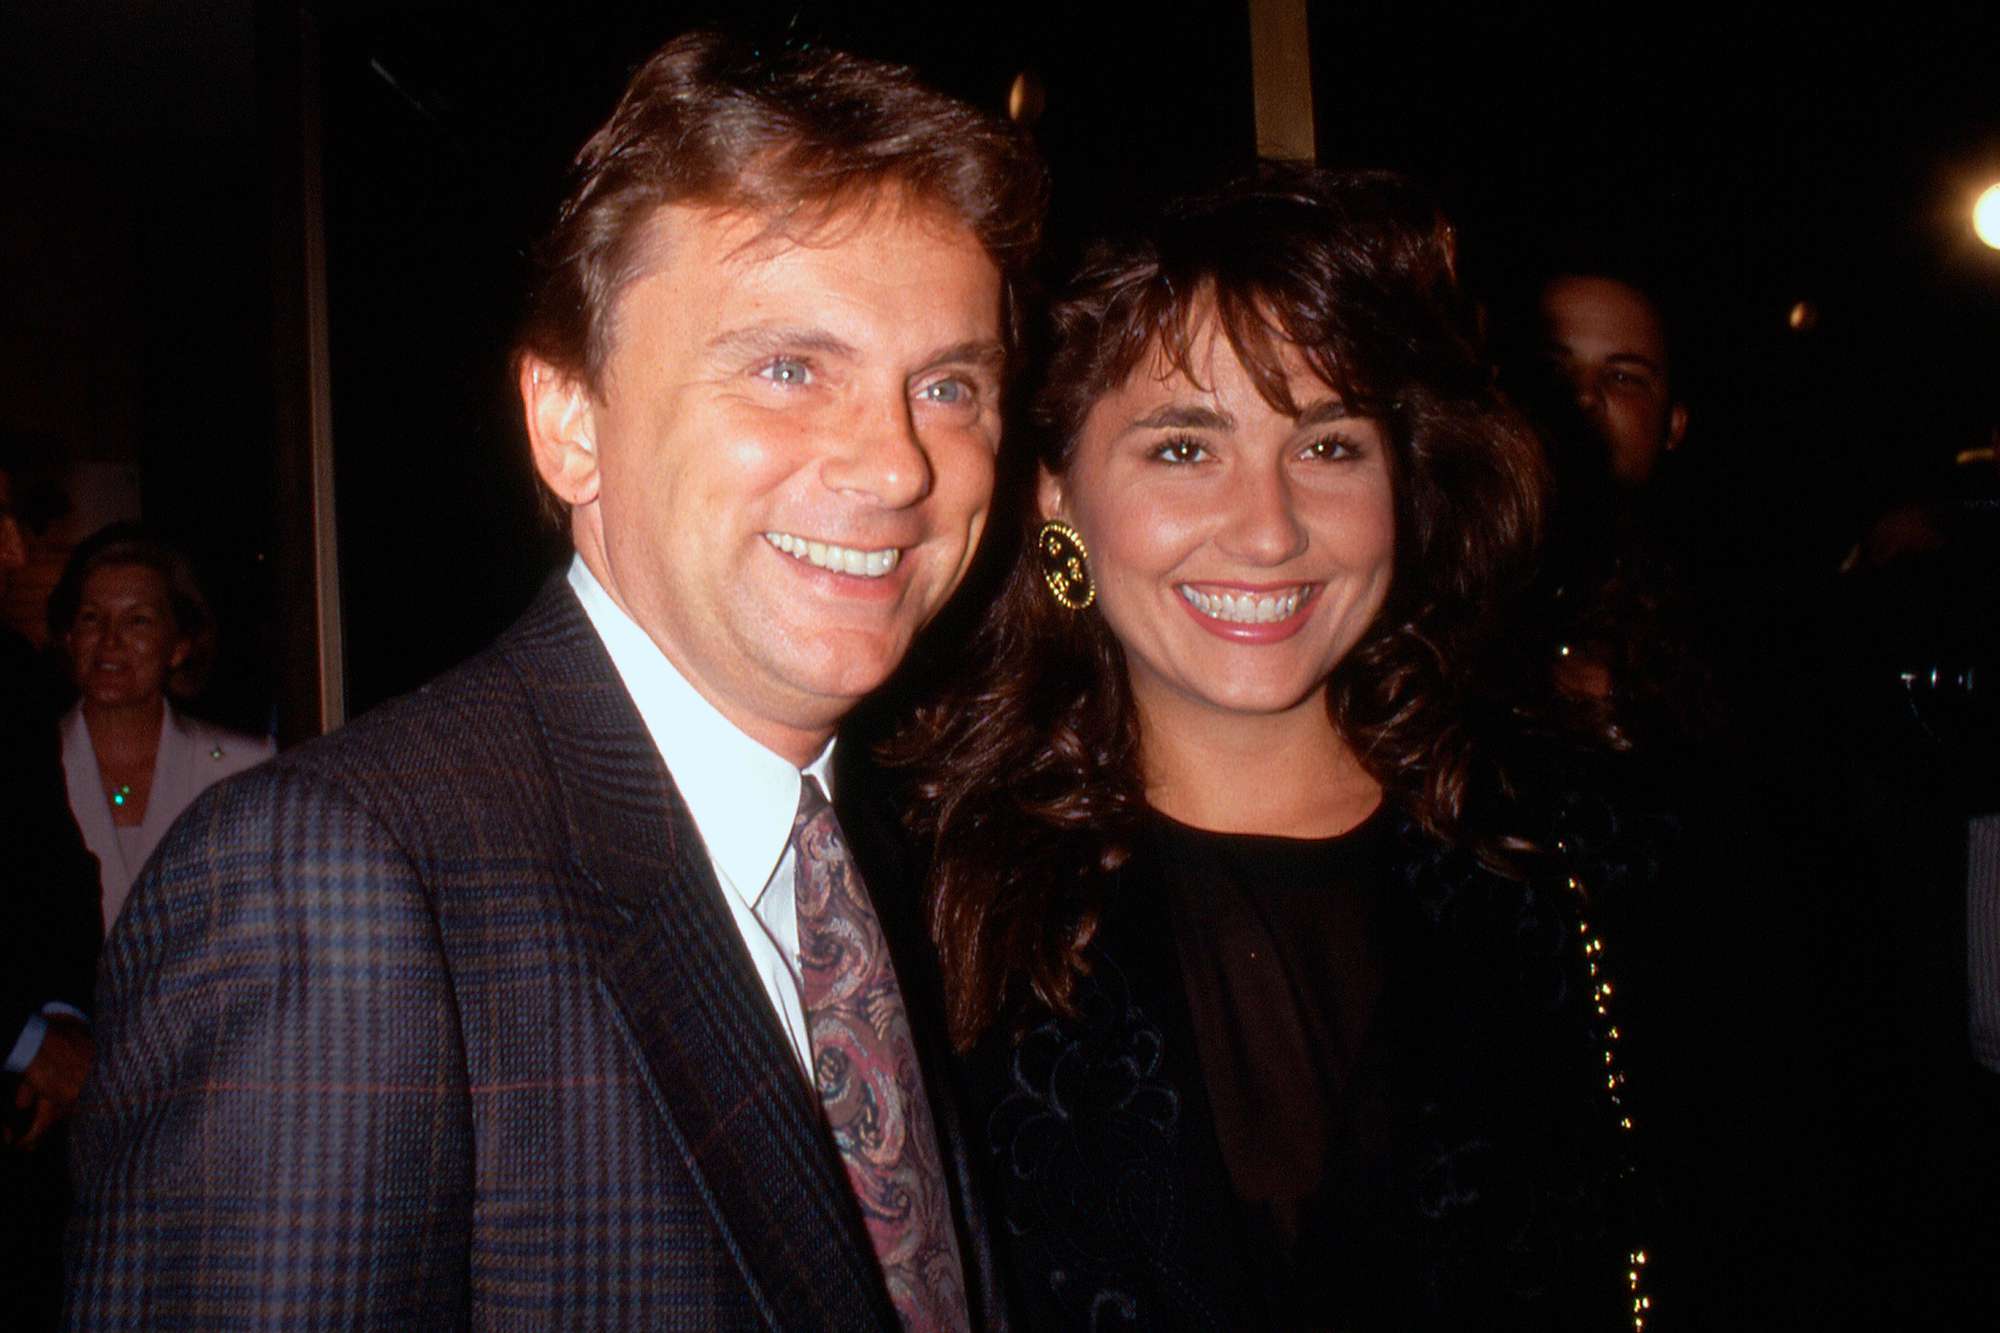 A Winning Pair! Throwback Photos of Pat Sajak and Wife Lesly Brown as He Signs Off from “Wheel of Fortune”